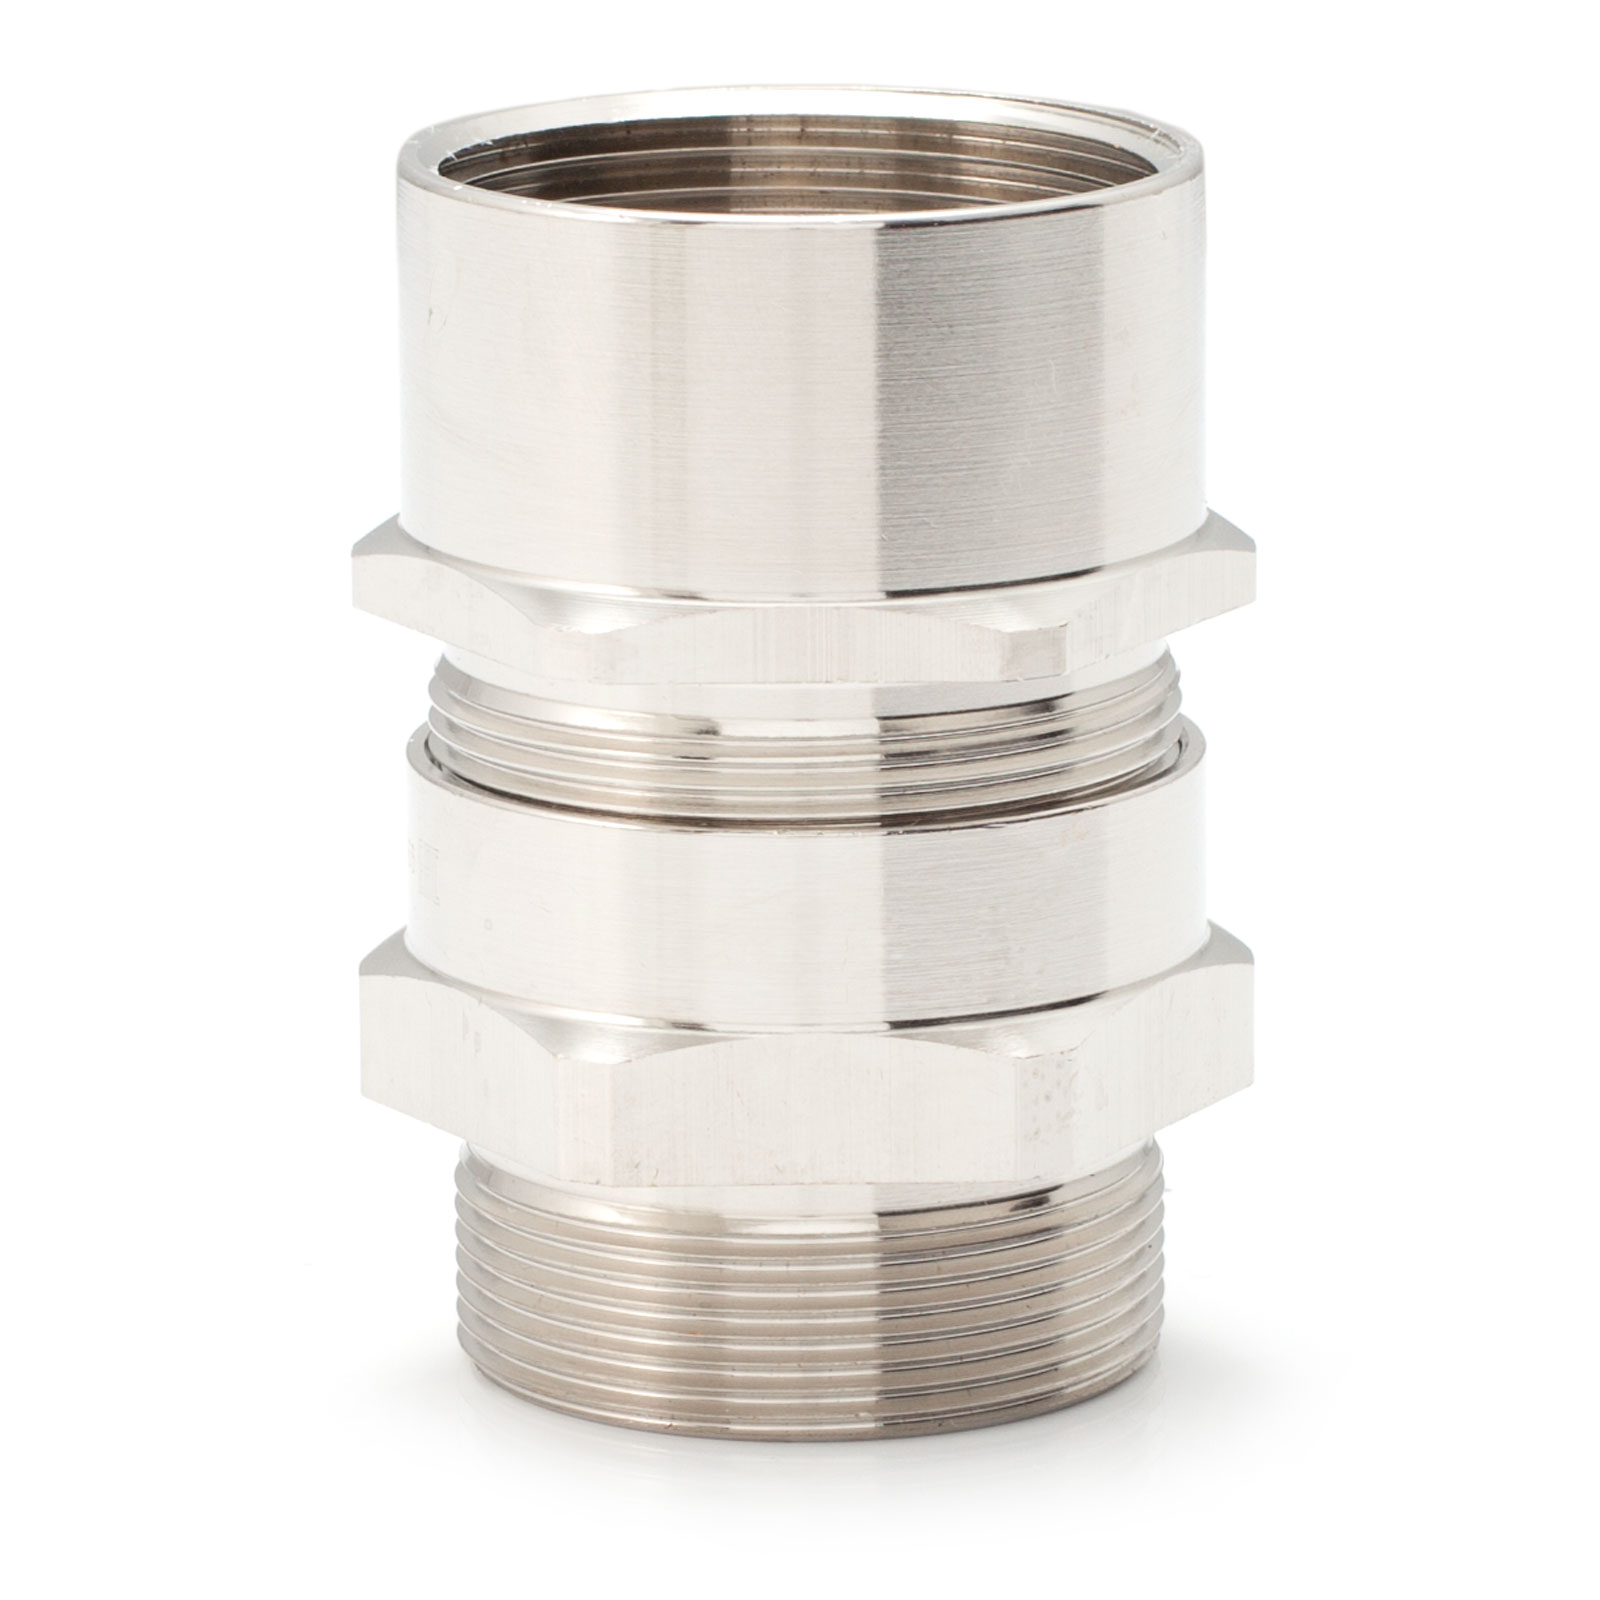 Explosion-proof cable glands series KNETV (A2FXRF.../EXE) for non-armored cable in hoses, conduits, metal hoses; female thread for exxternal connection